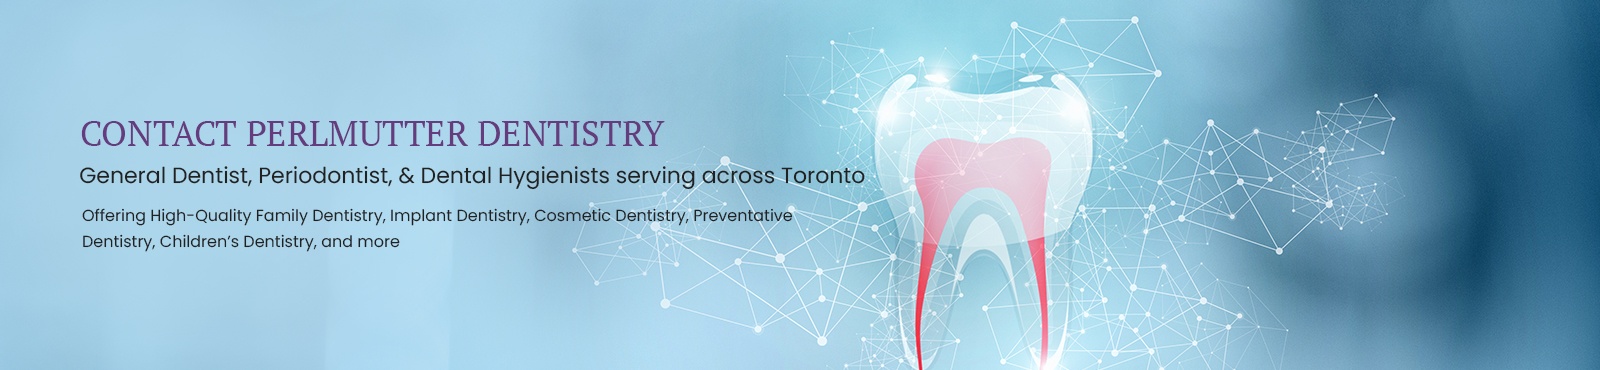 Feel free to get in touch with us at Perlmutter Dentistry for all your Dental needs in Toronto